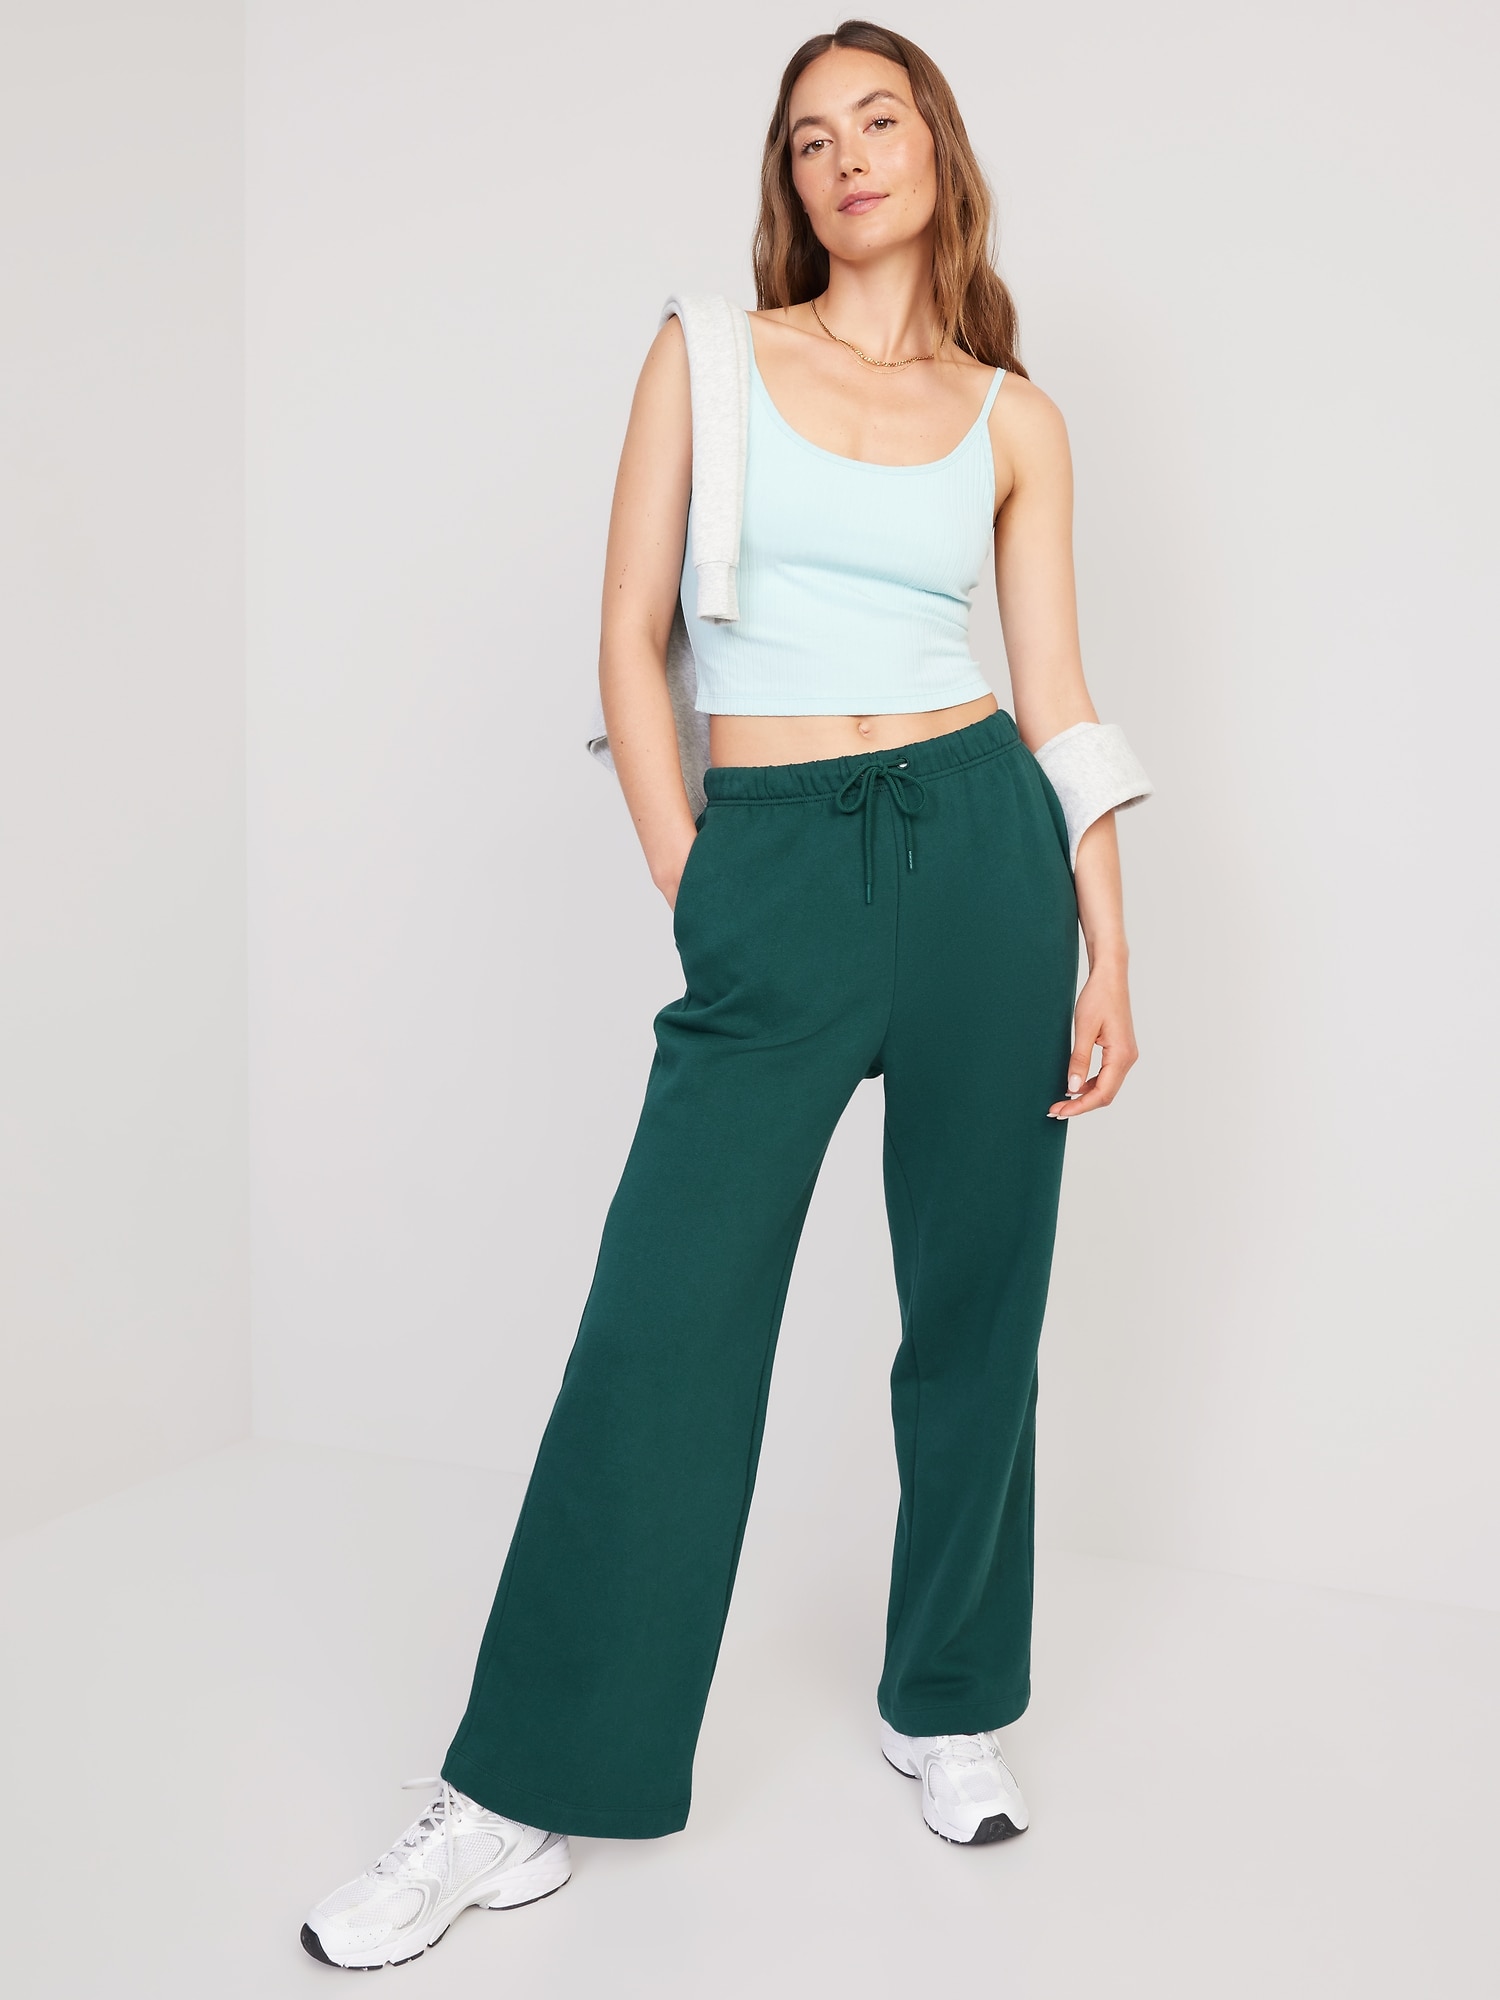 Extra for Sweatpants | Navy Vintage High-Waisted Women Old